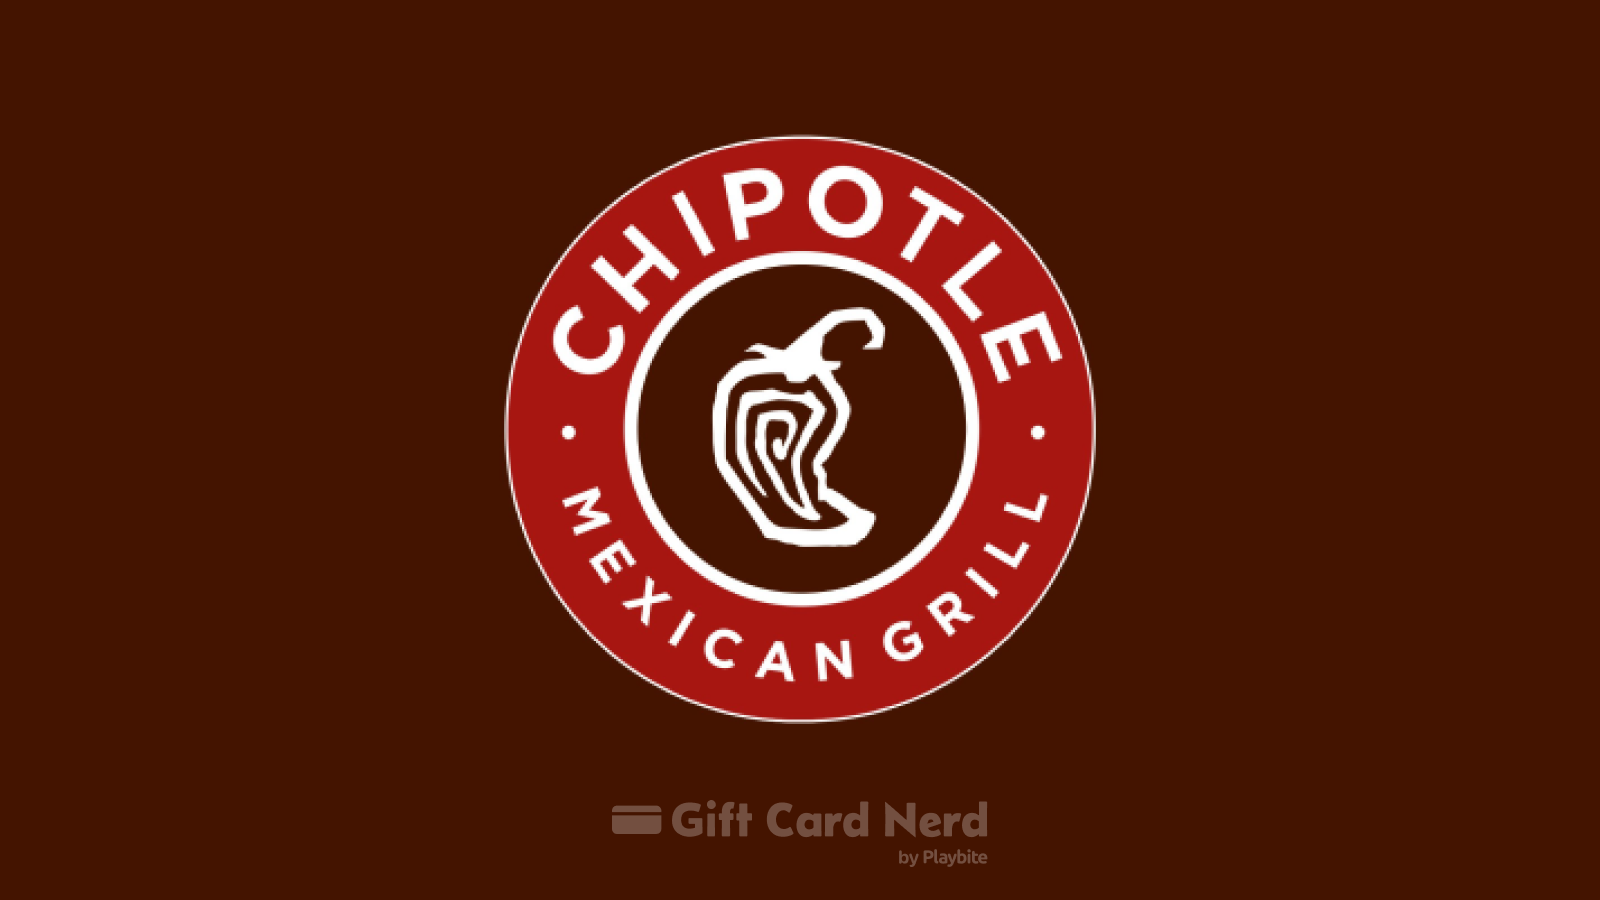 Can I use a Chipotle gift card on Cash App?